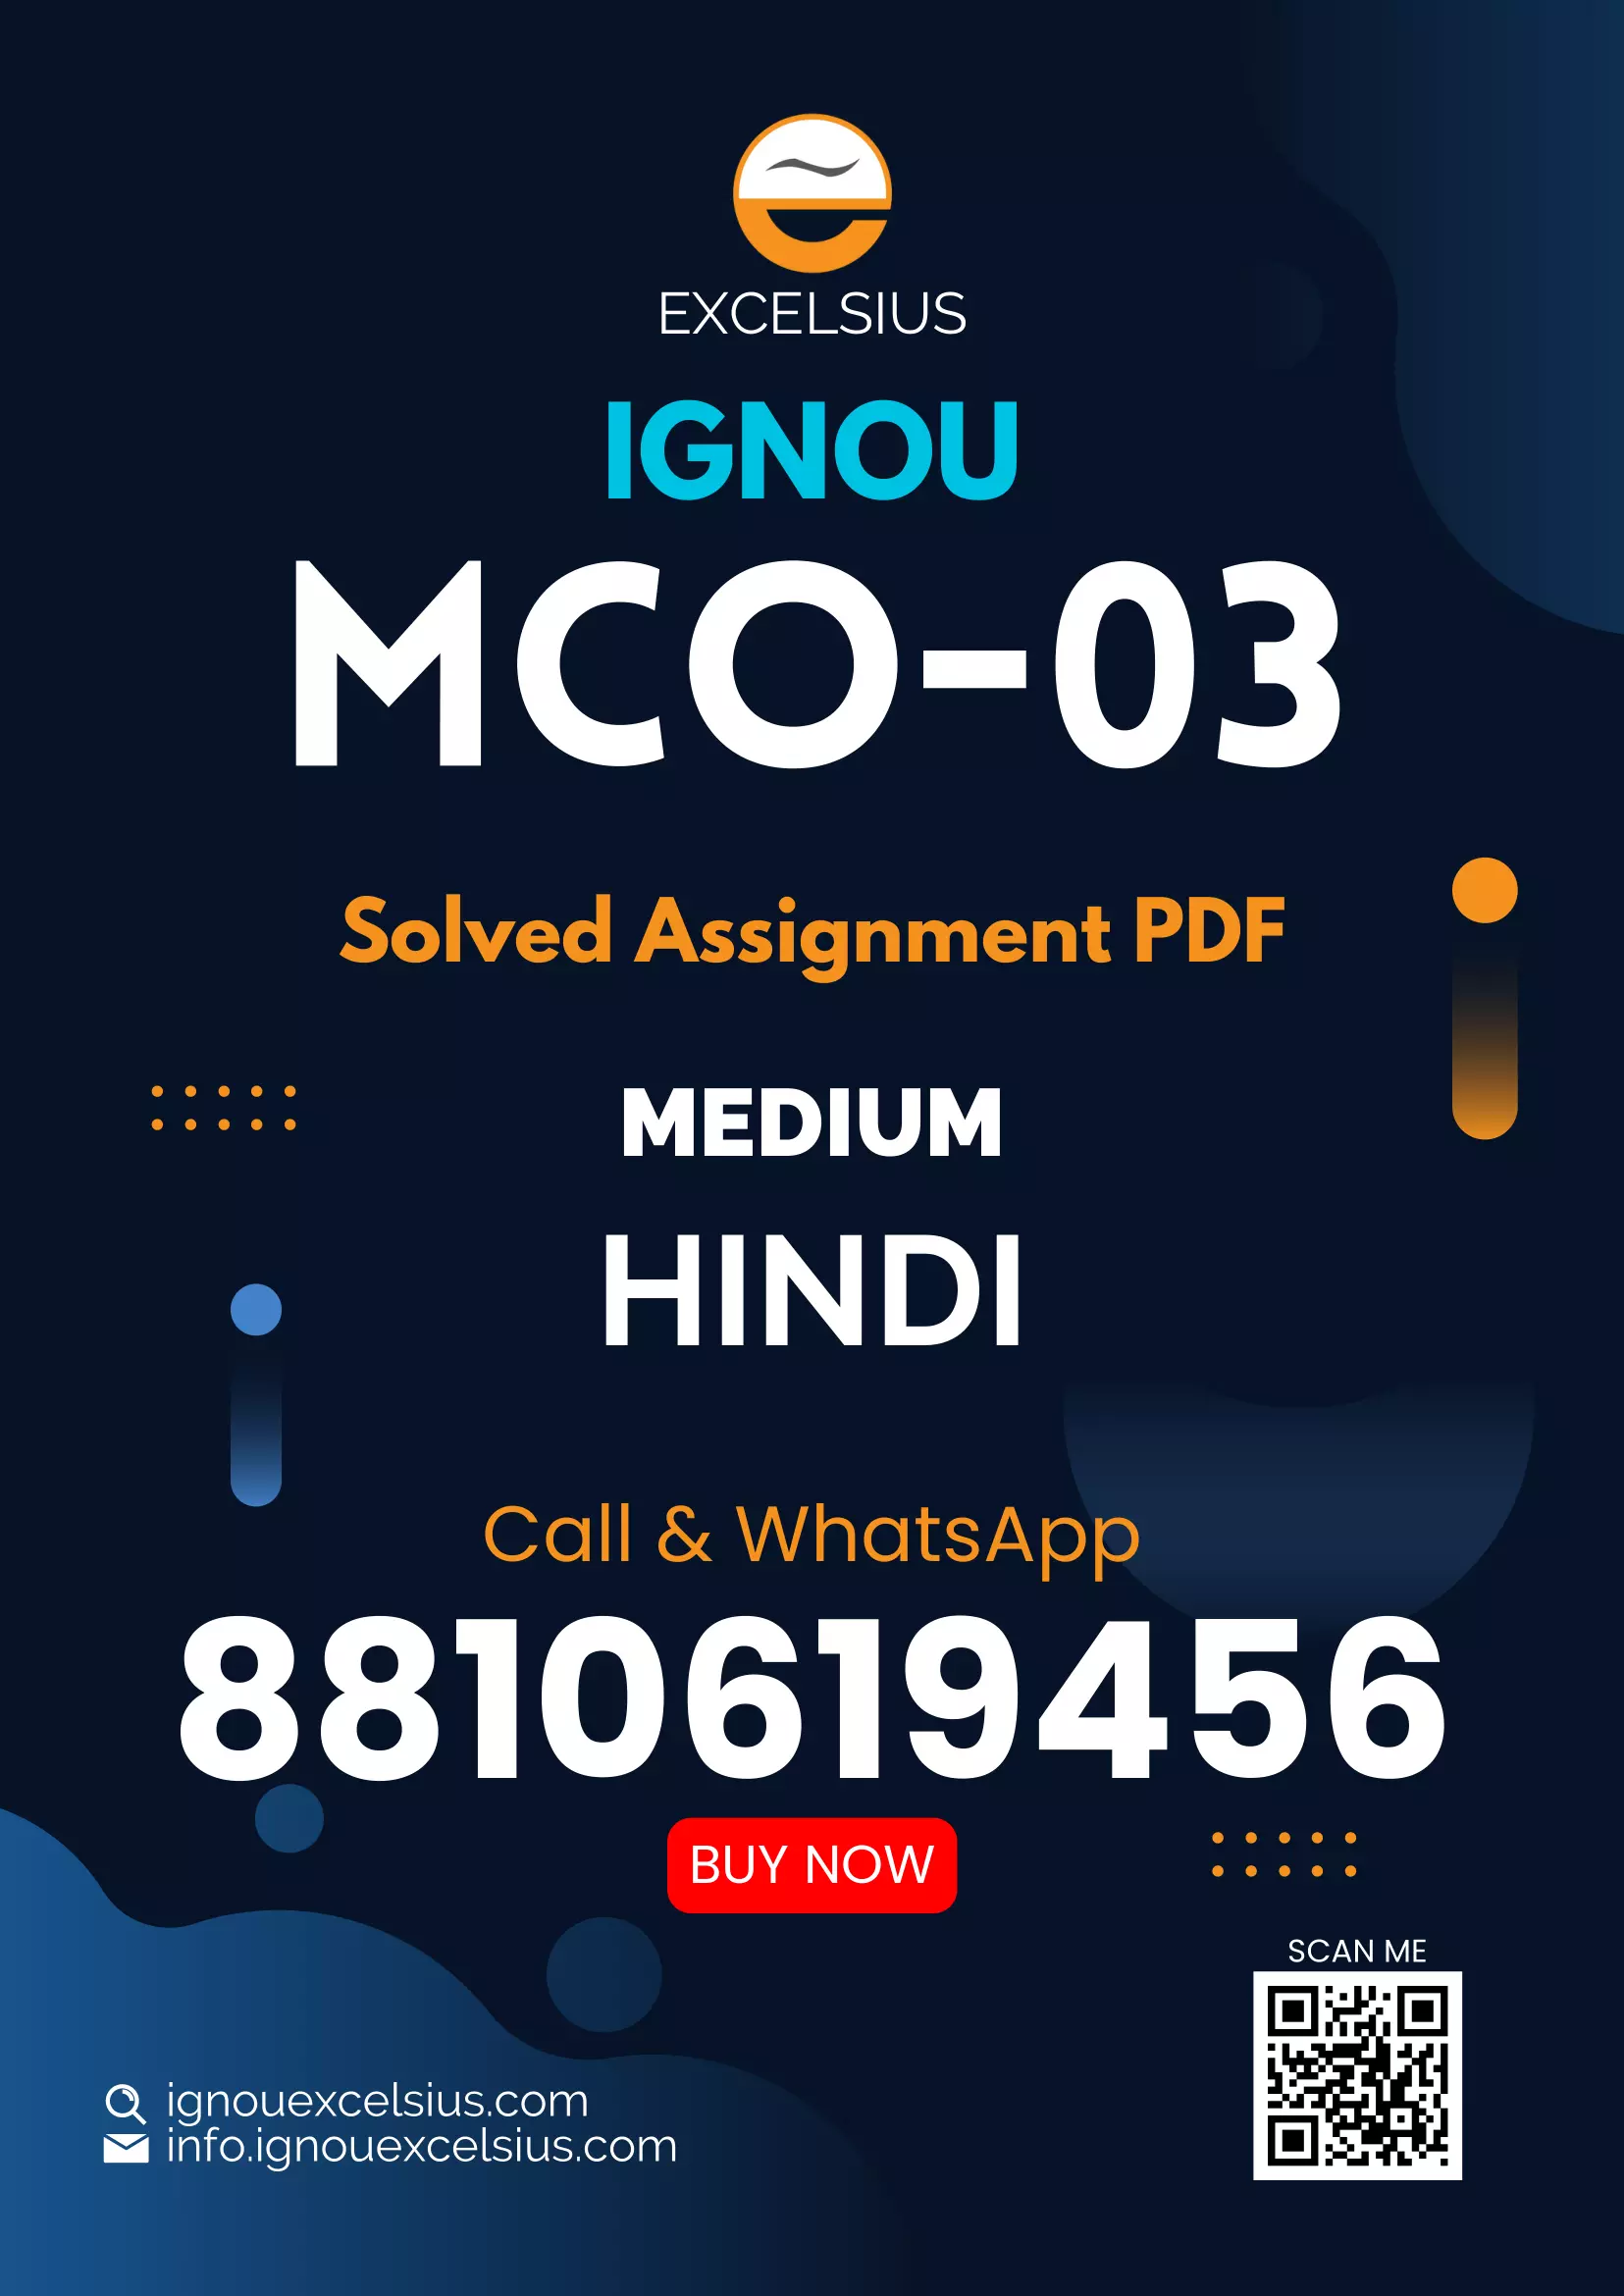 IGNOU MCO-03 - Research Methodology and Statistical Analysis, Latest Solved Assignment-July 2022 – January 2023